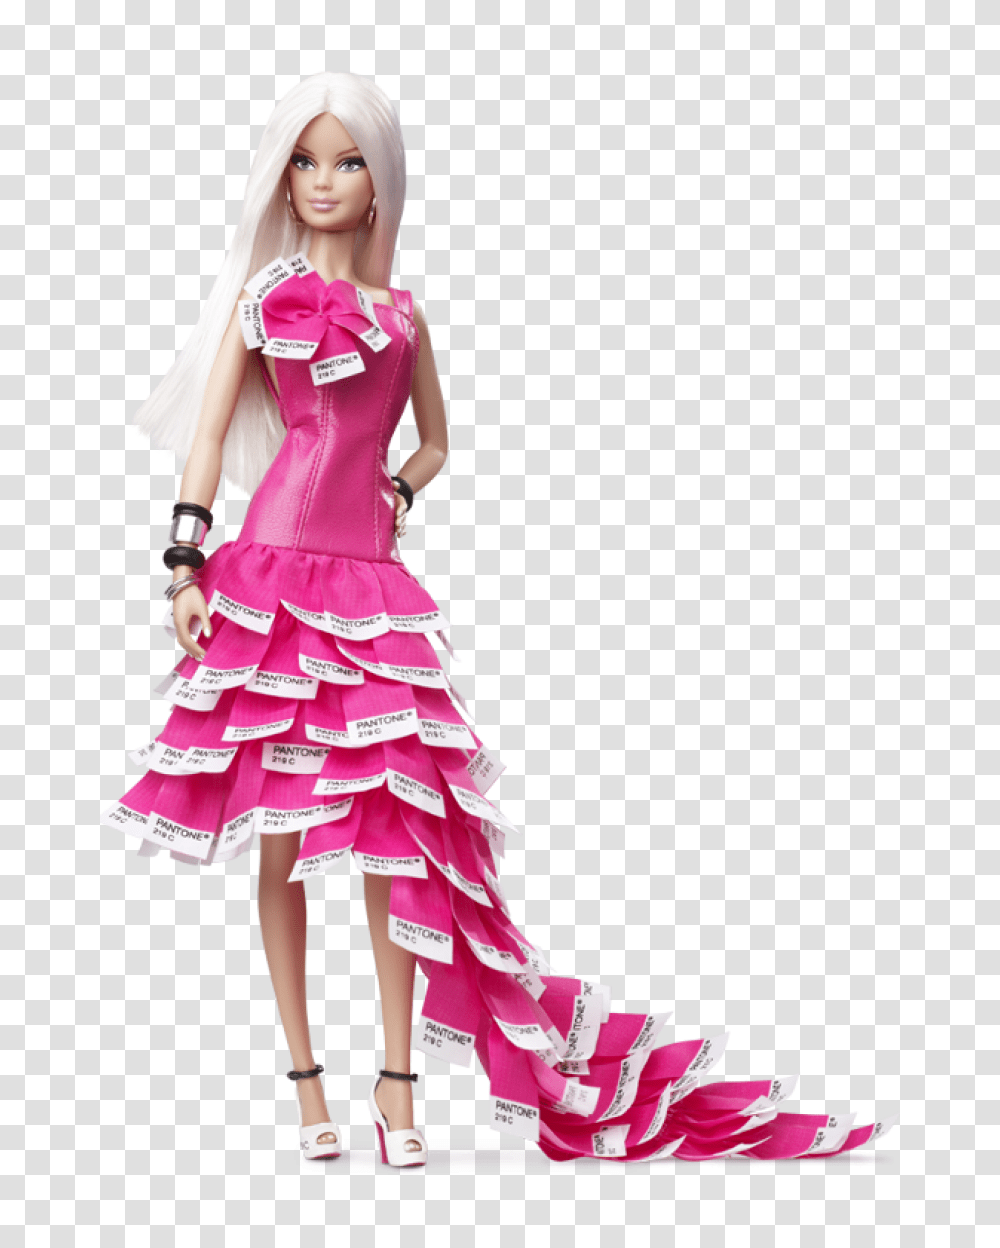 Download Barbie Doll Image For Free Pink In Pantone Barbie, Toy, Dress, Clothing, Apparel Transparent Png